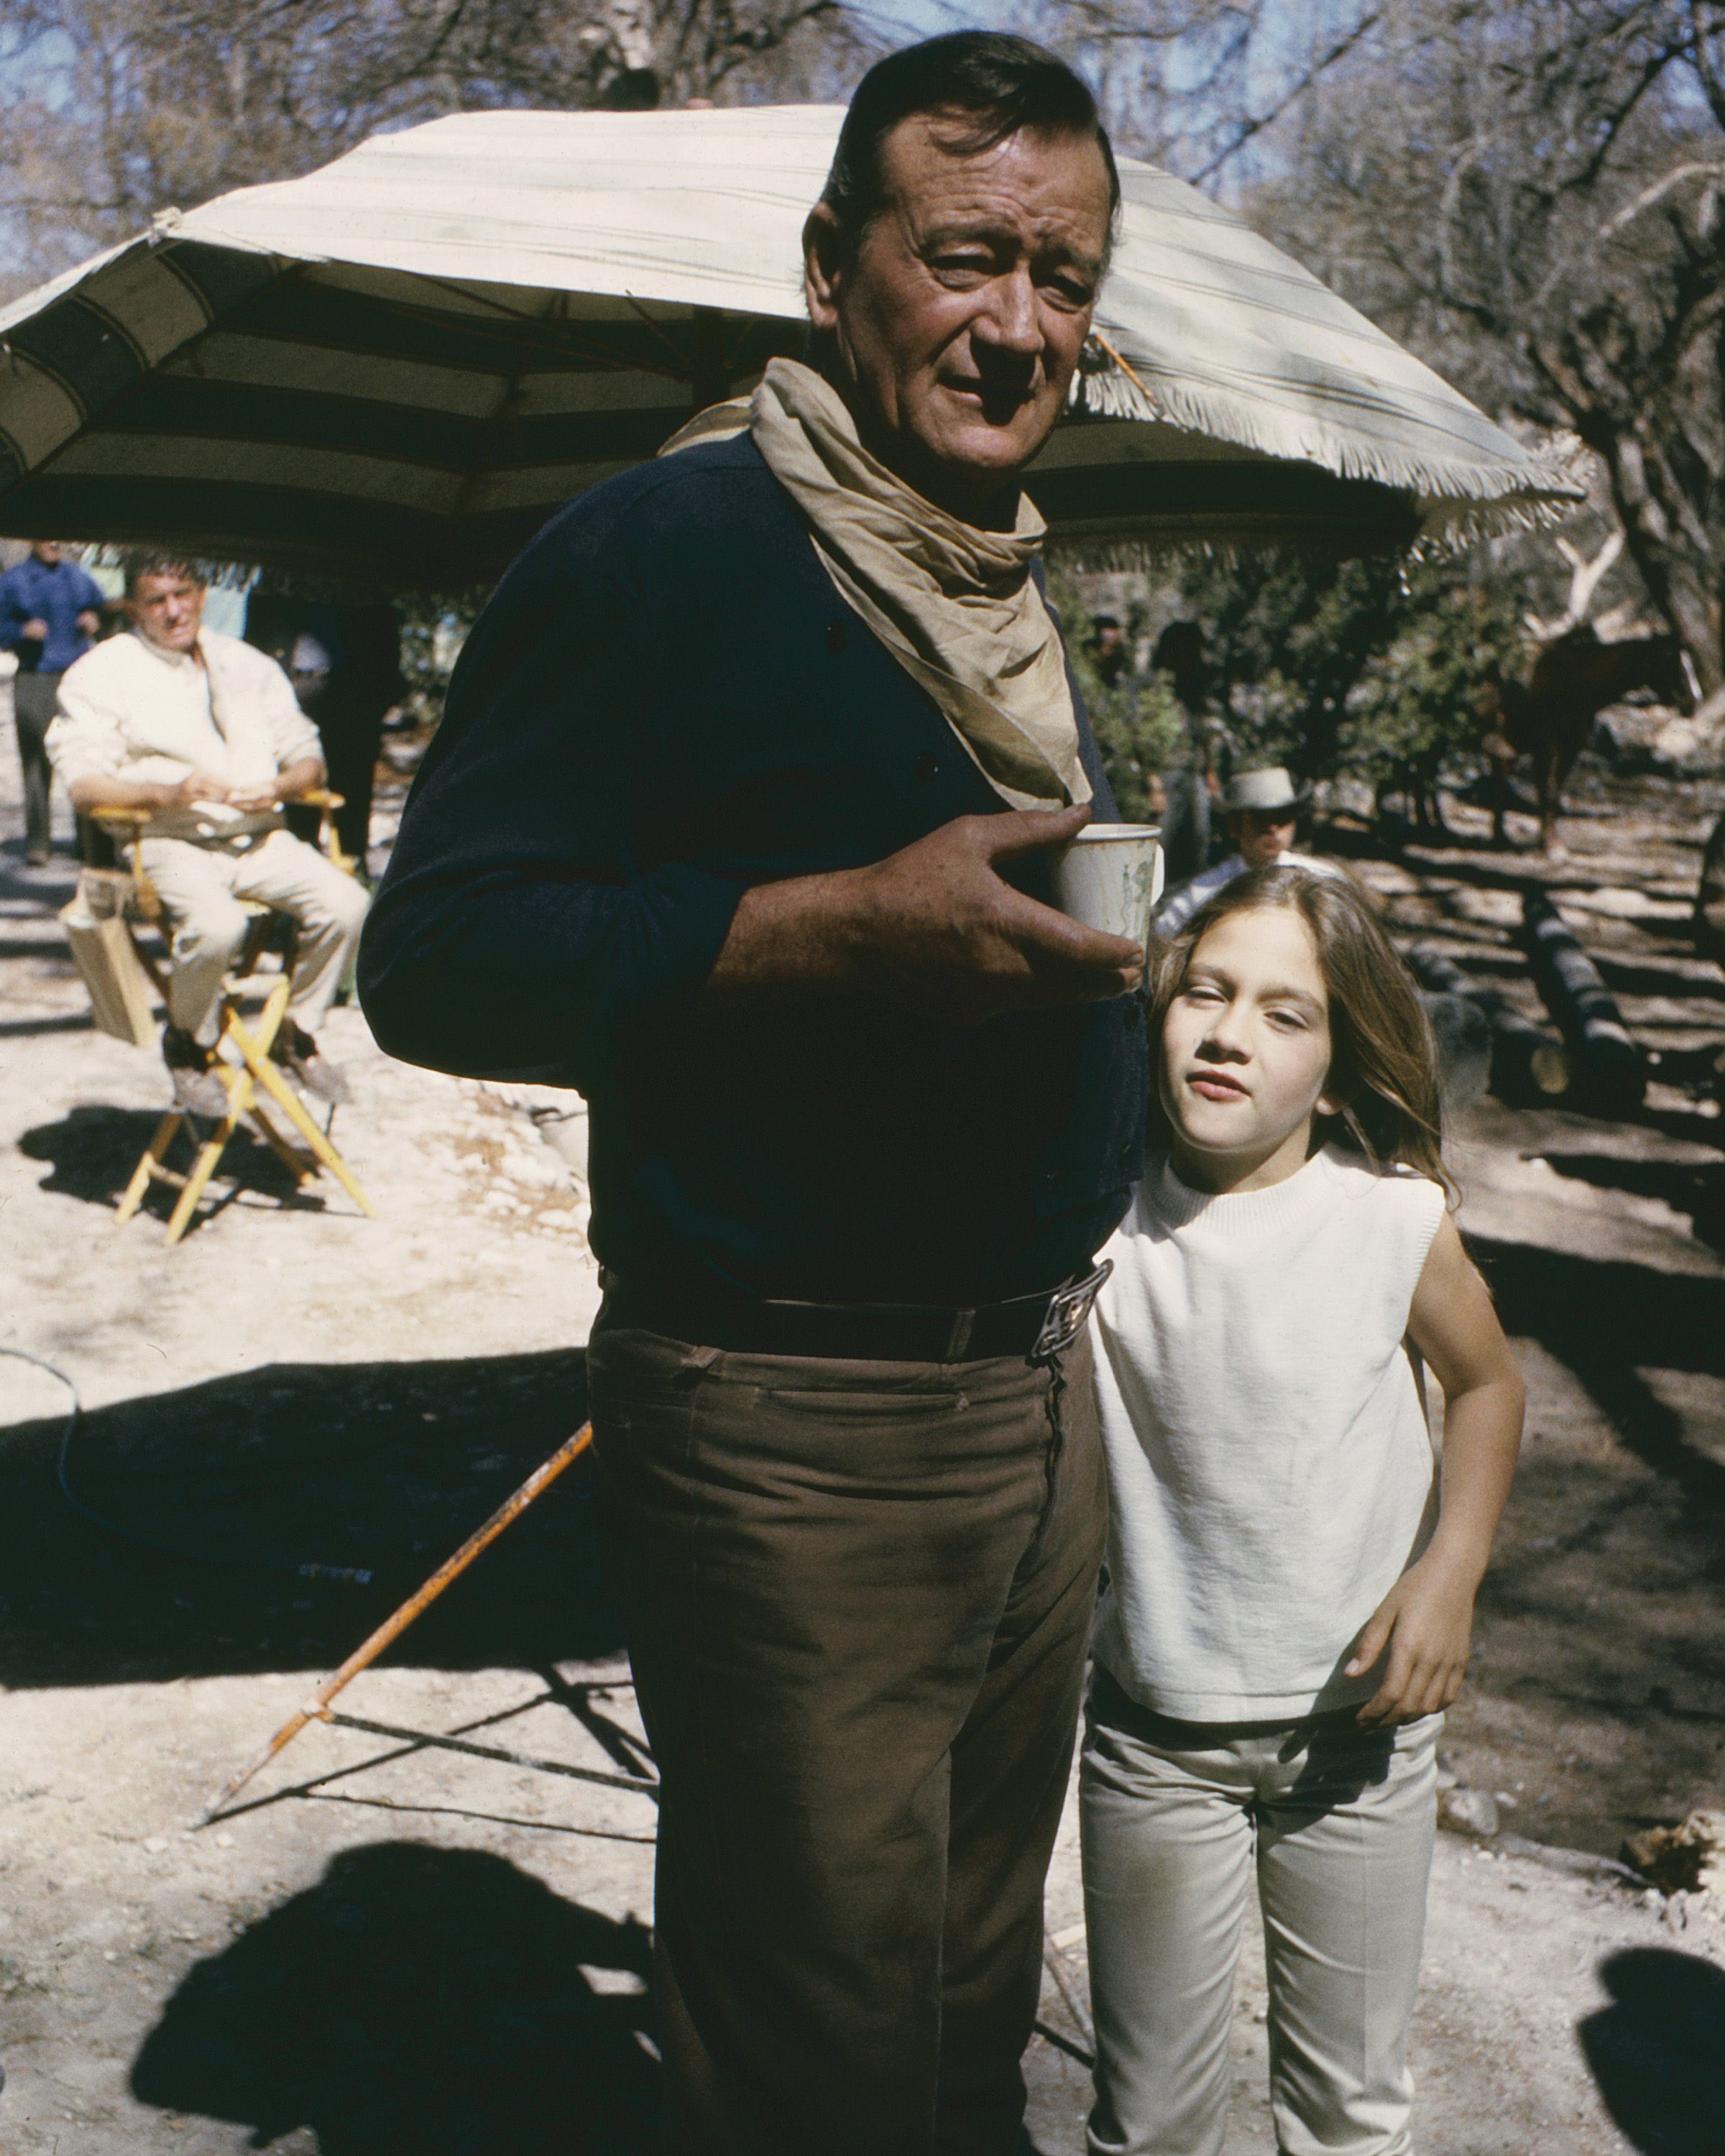 John Wayne as John Elder with his daughter, Aissa, on the set of "The Sons of Katie Elder" in 1965 | Source: Getty Images